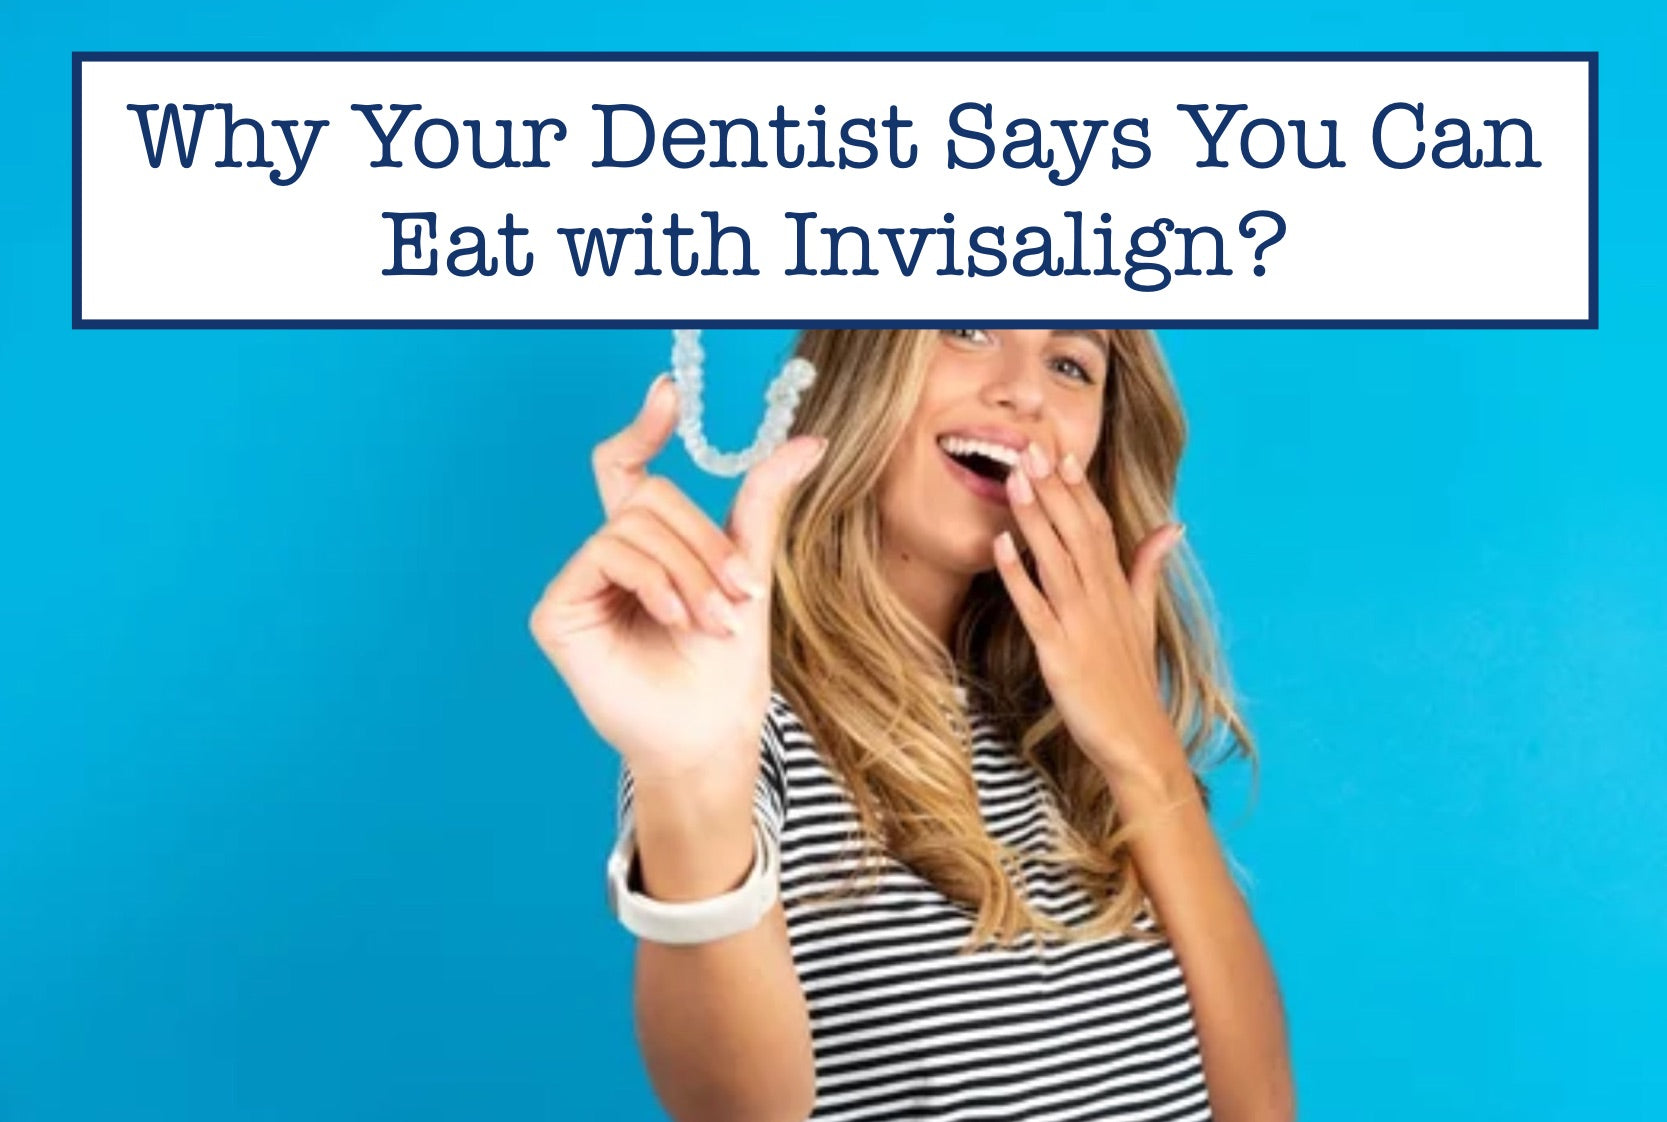 Can You Eat with Invisalign On?